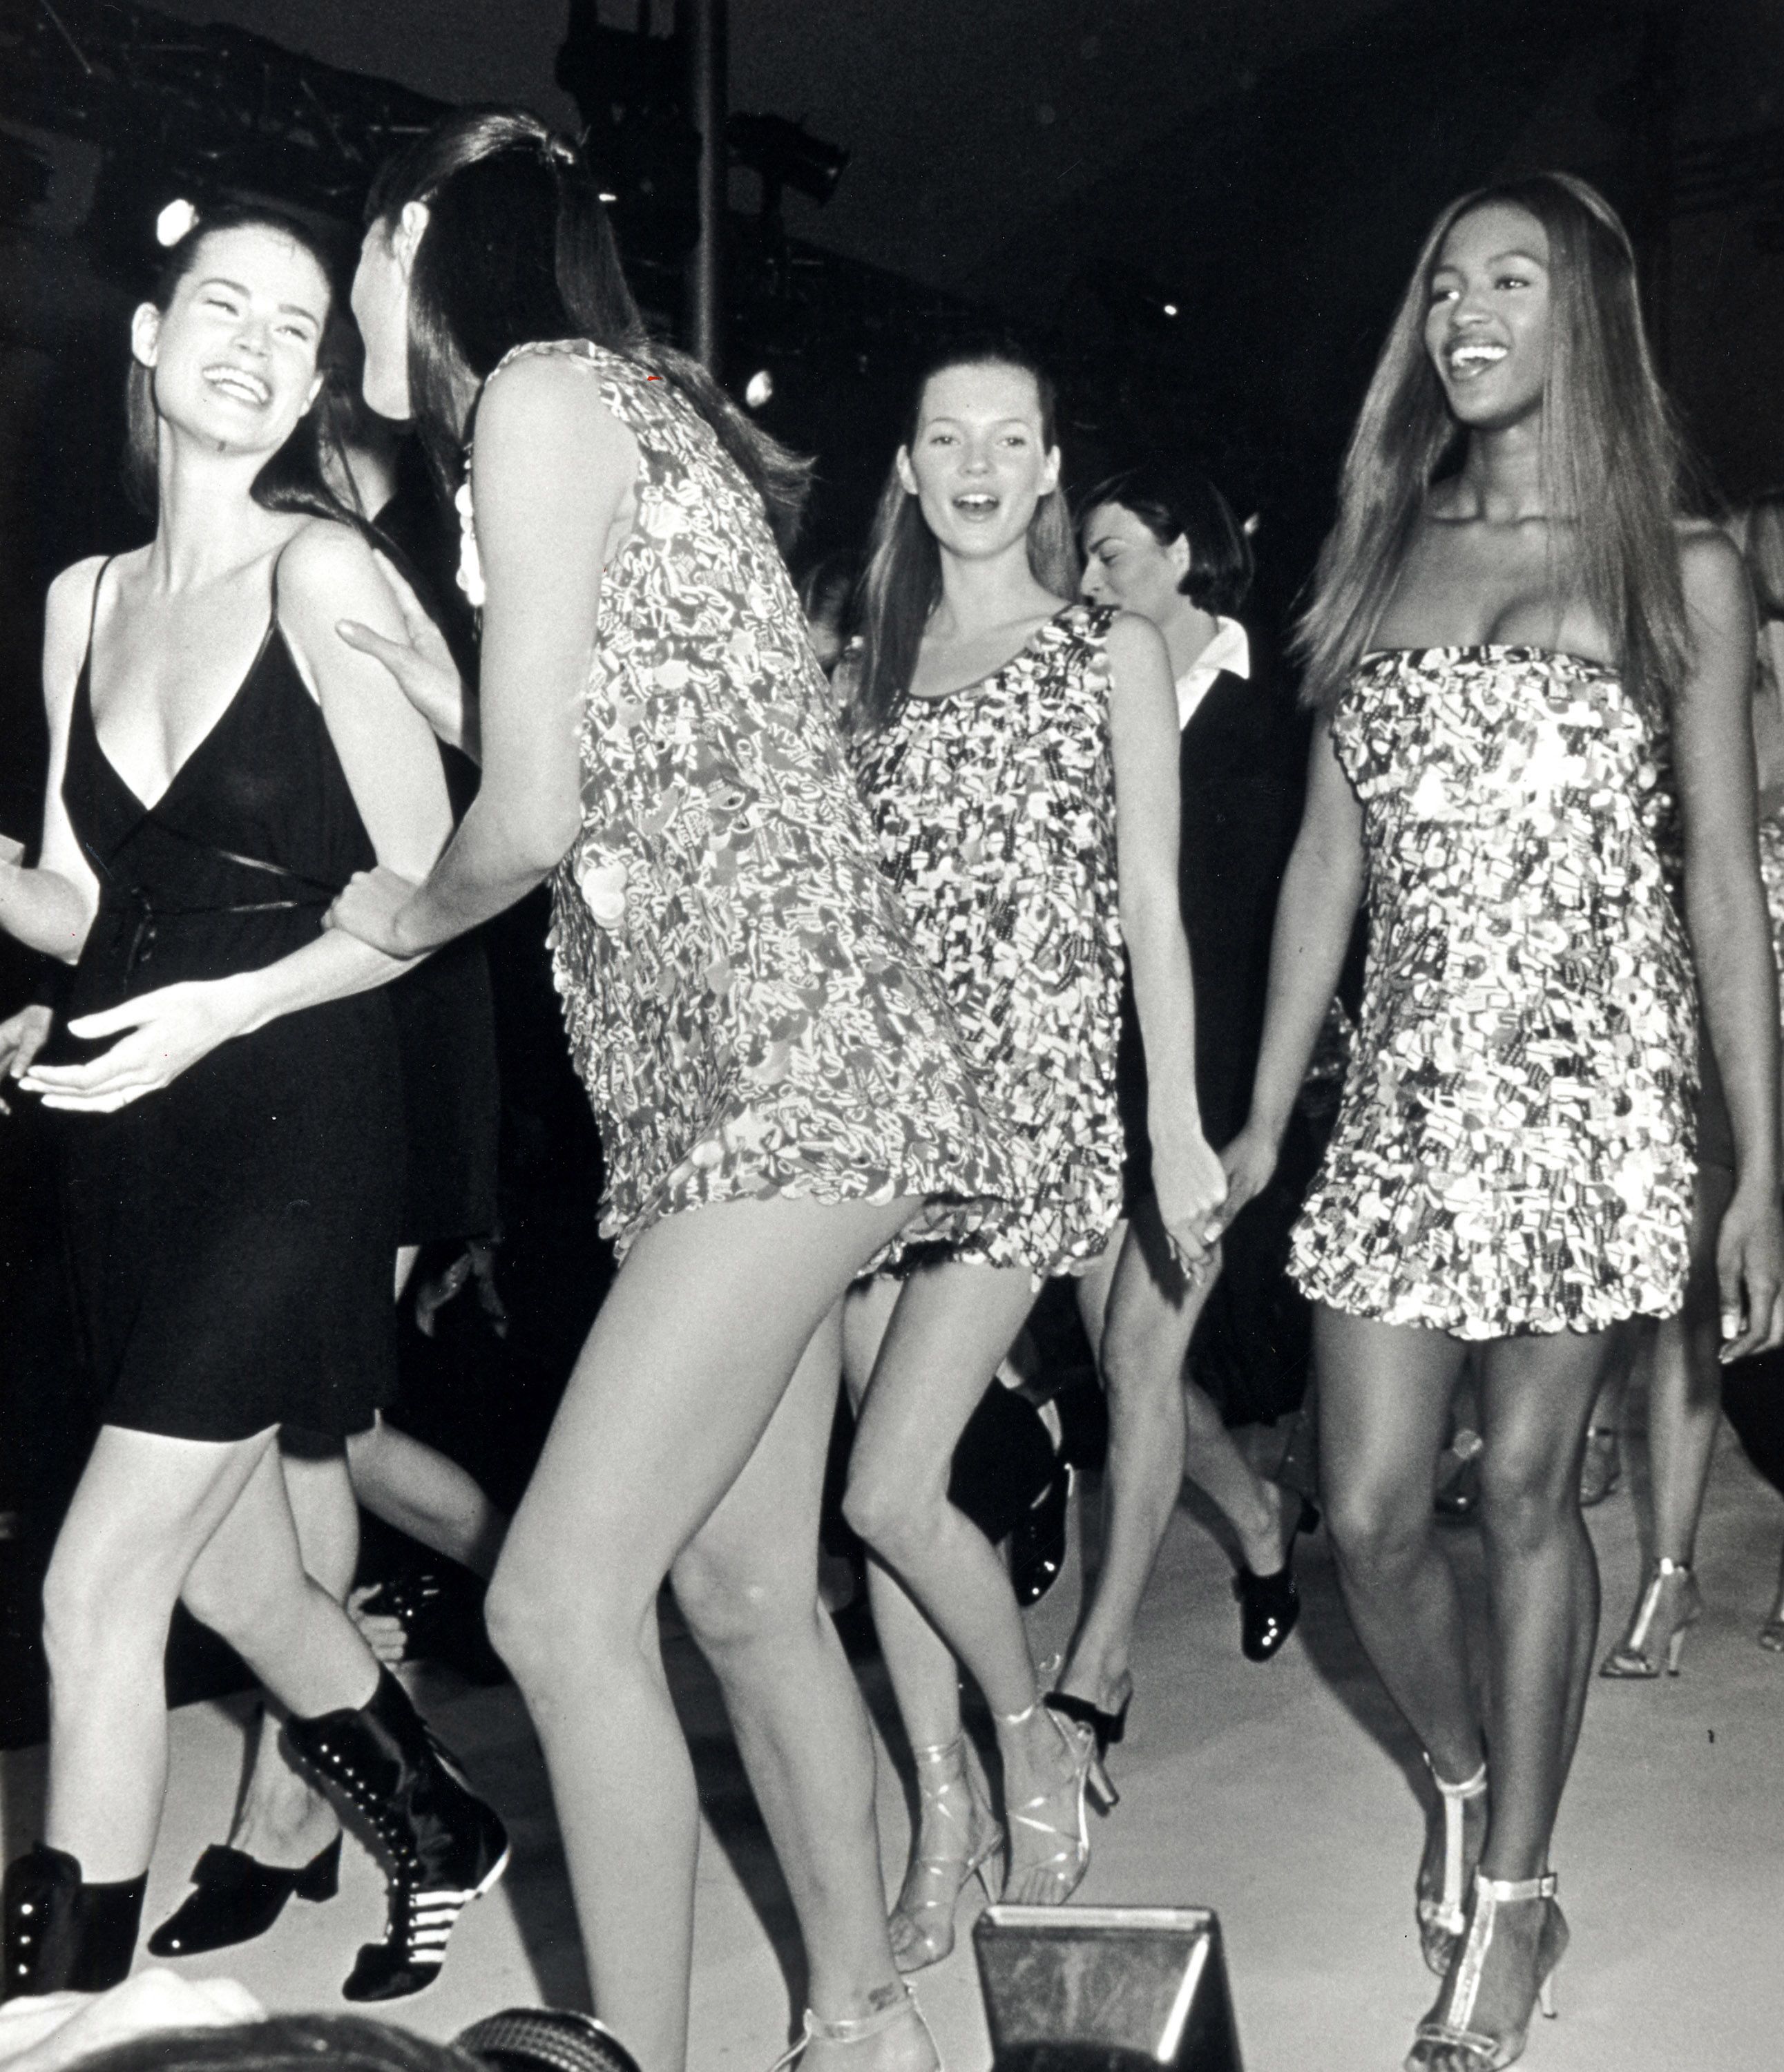 18 New York Fashion Week Photos That Will Transport You To The '90s